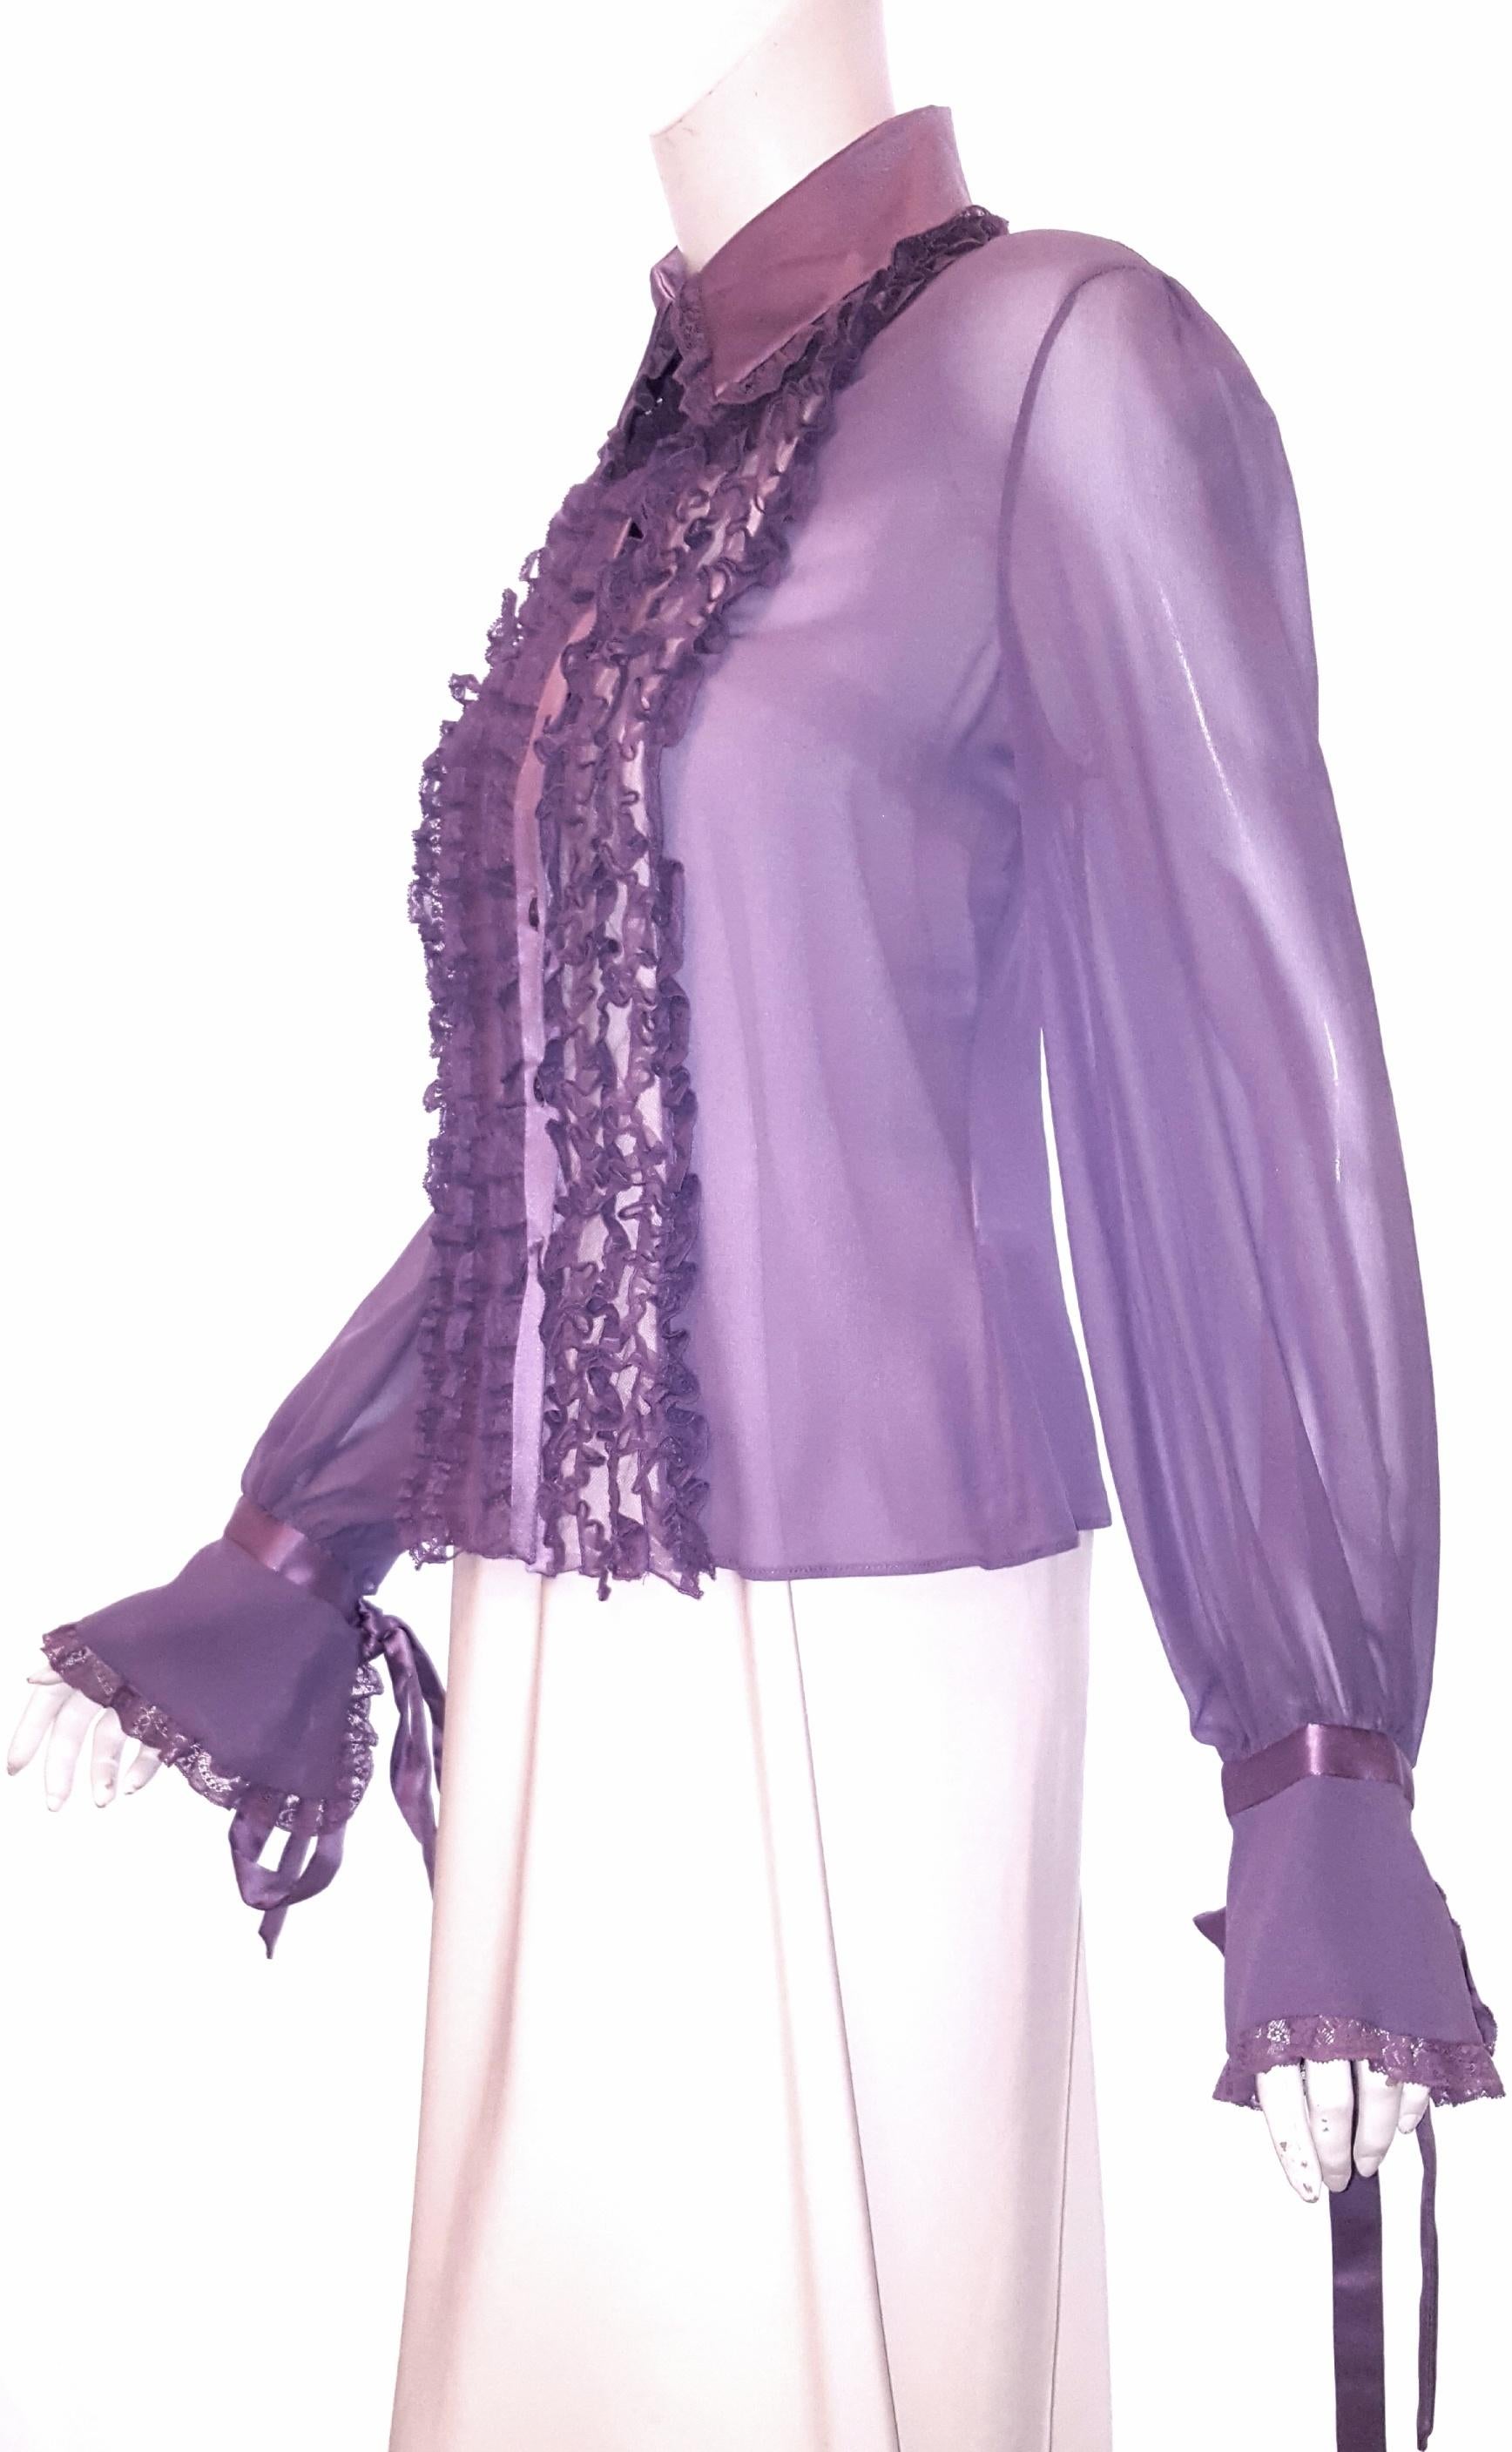 Valentino lavender long sleeve blouse combines femininity and sensuality.  This 100% silk blouse is embellished with 5 rows of lace on each side of the buttons, around the collar and on the cuffs.  The long sleeves finish with cuffs down to the